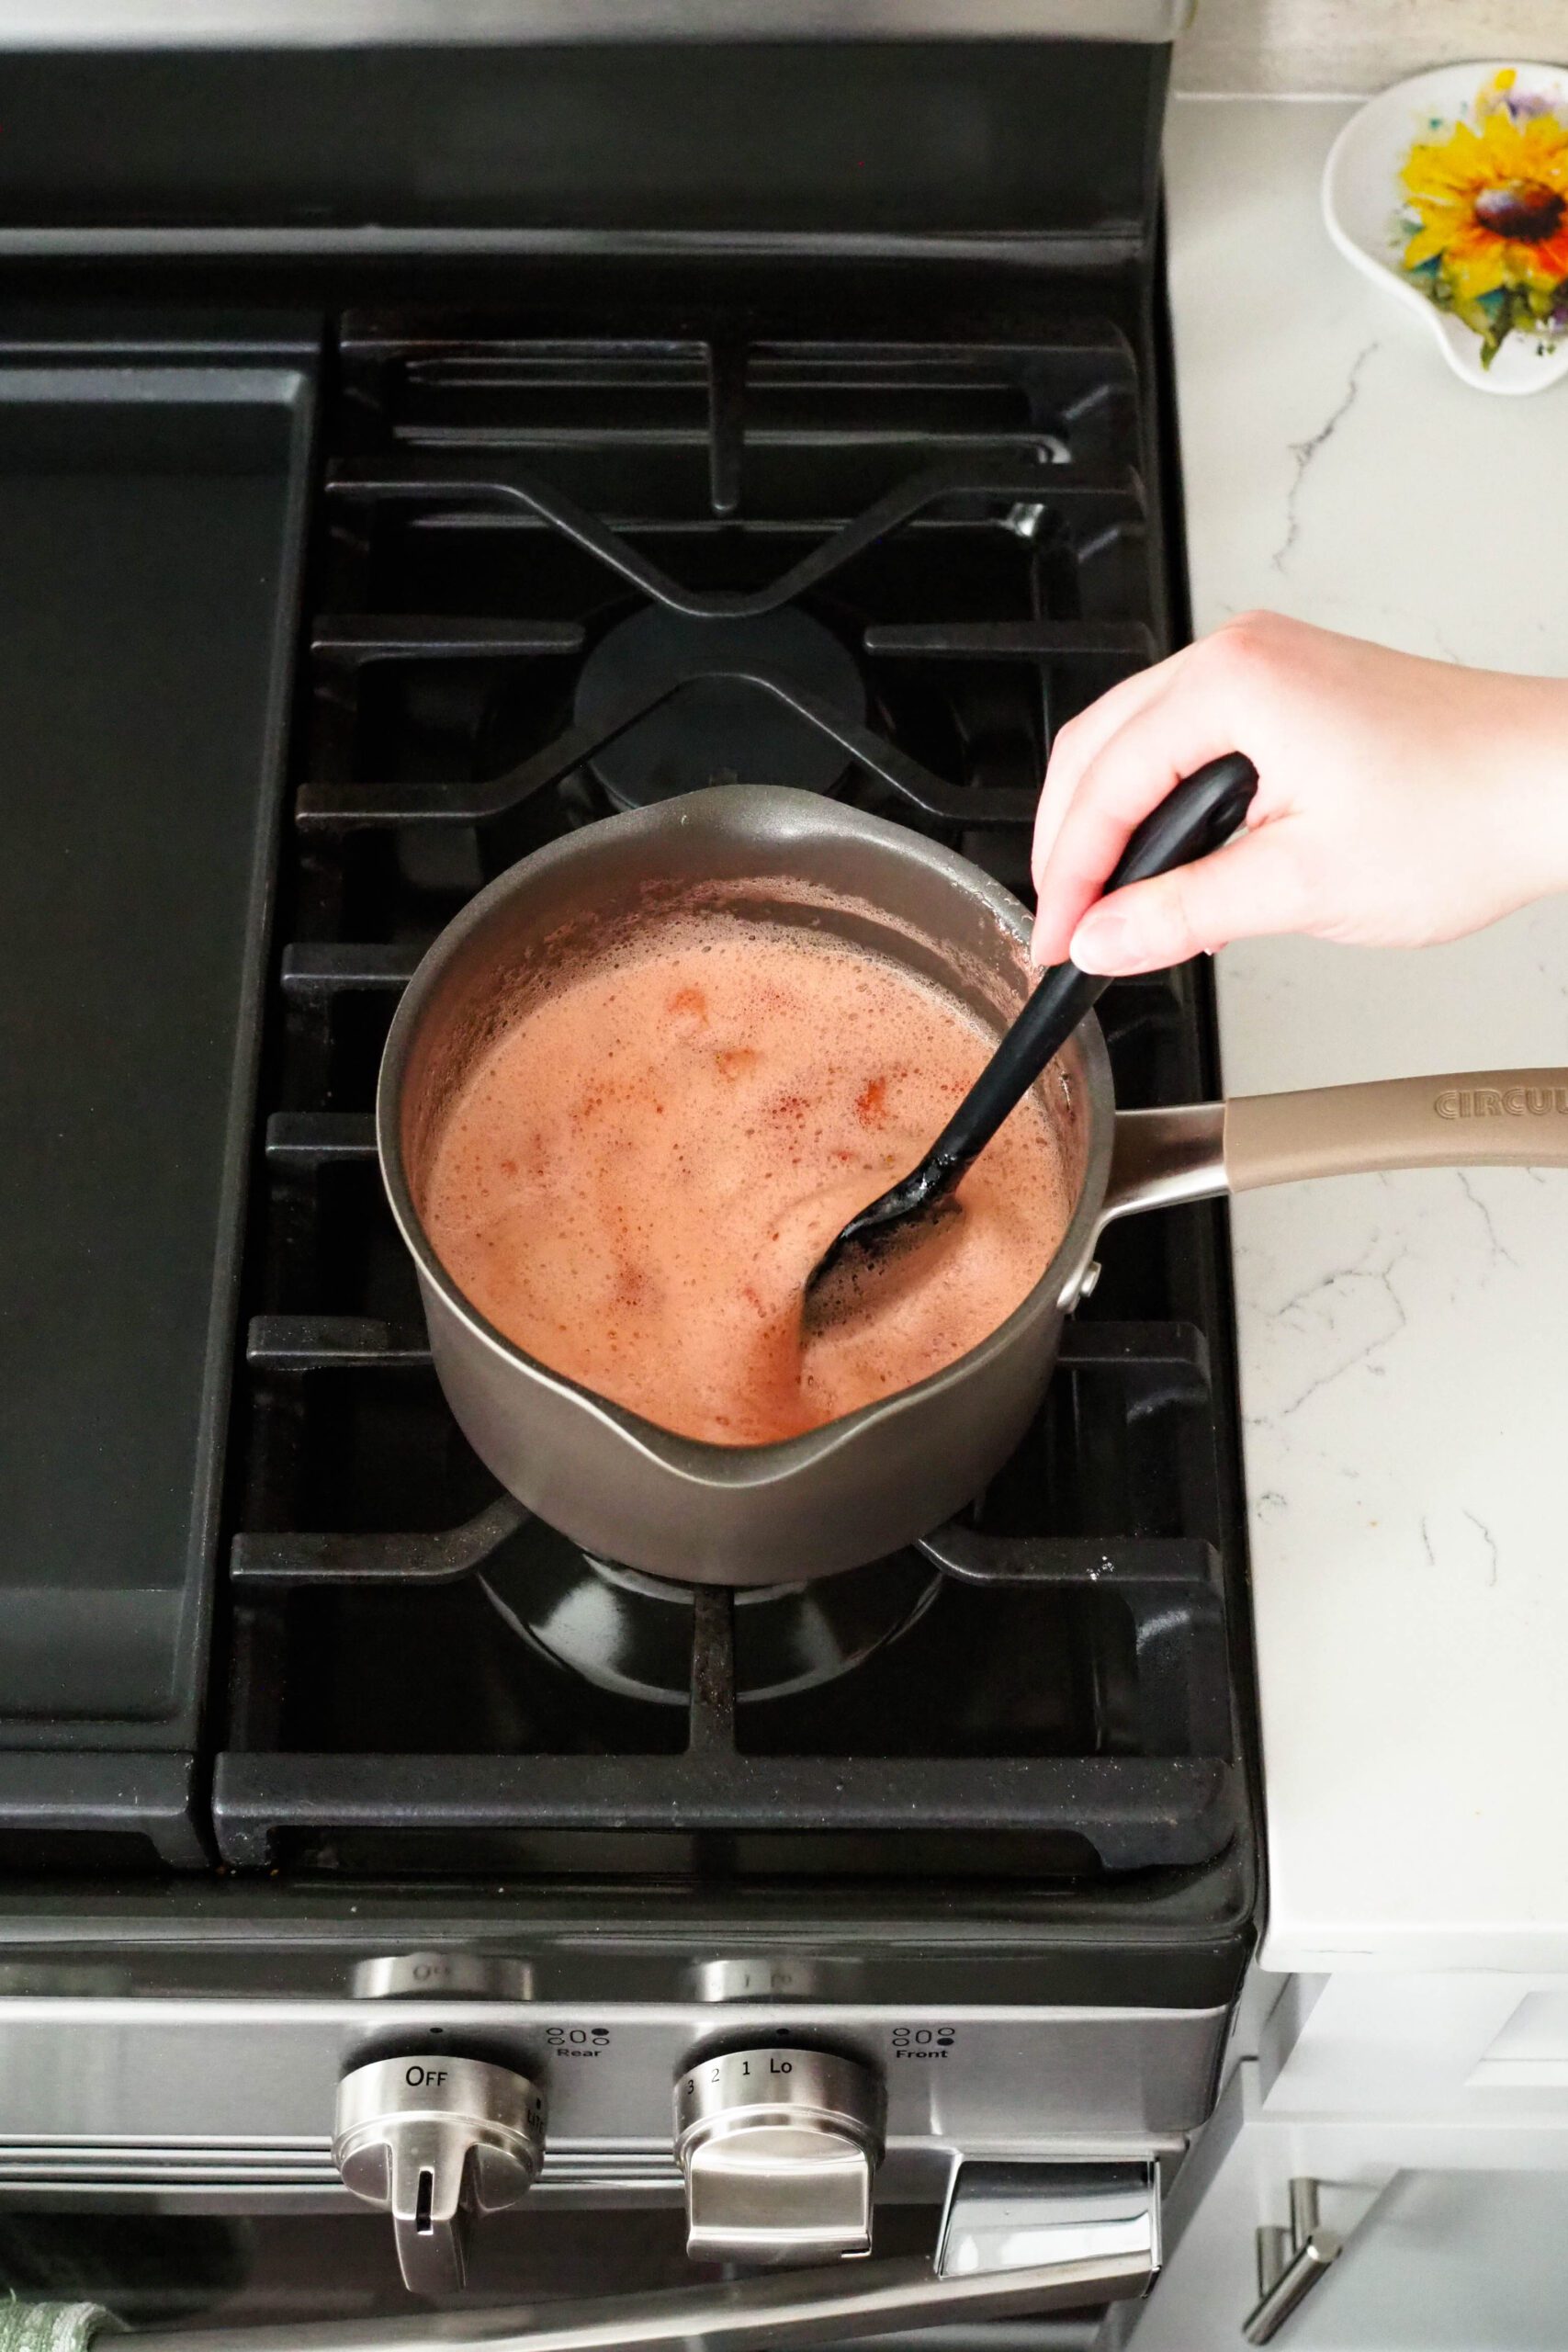 A black spatula stirs a pot of bubbling diced strawberries.